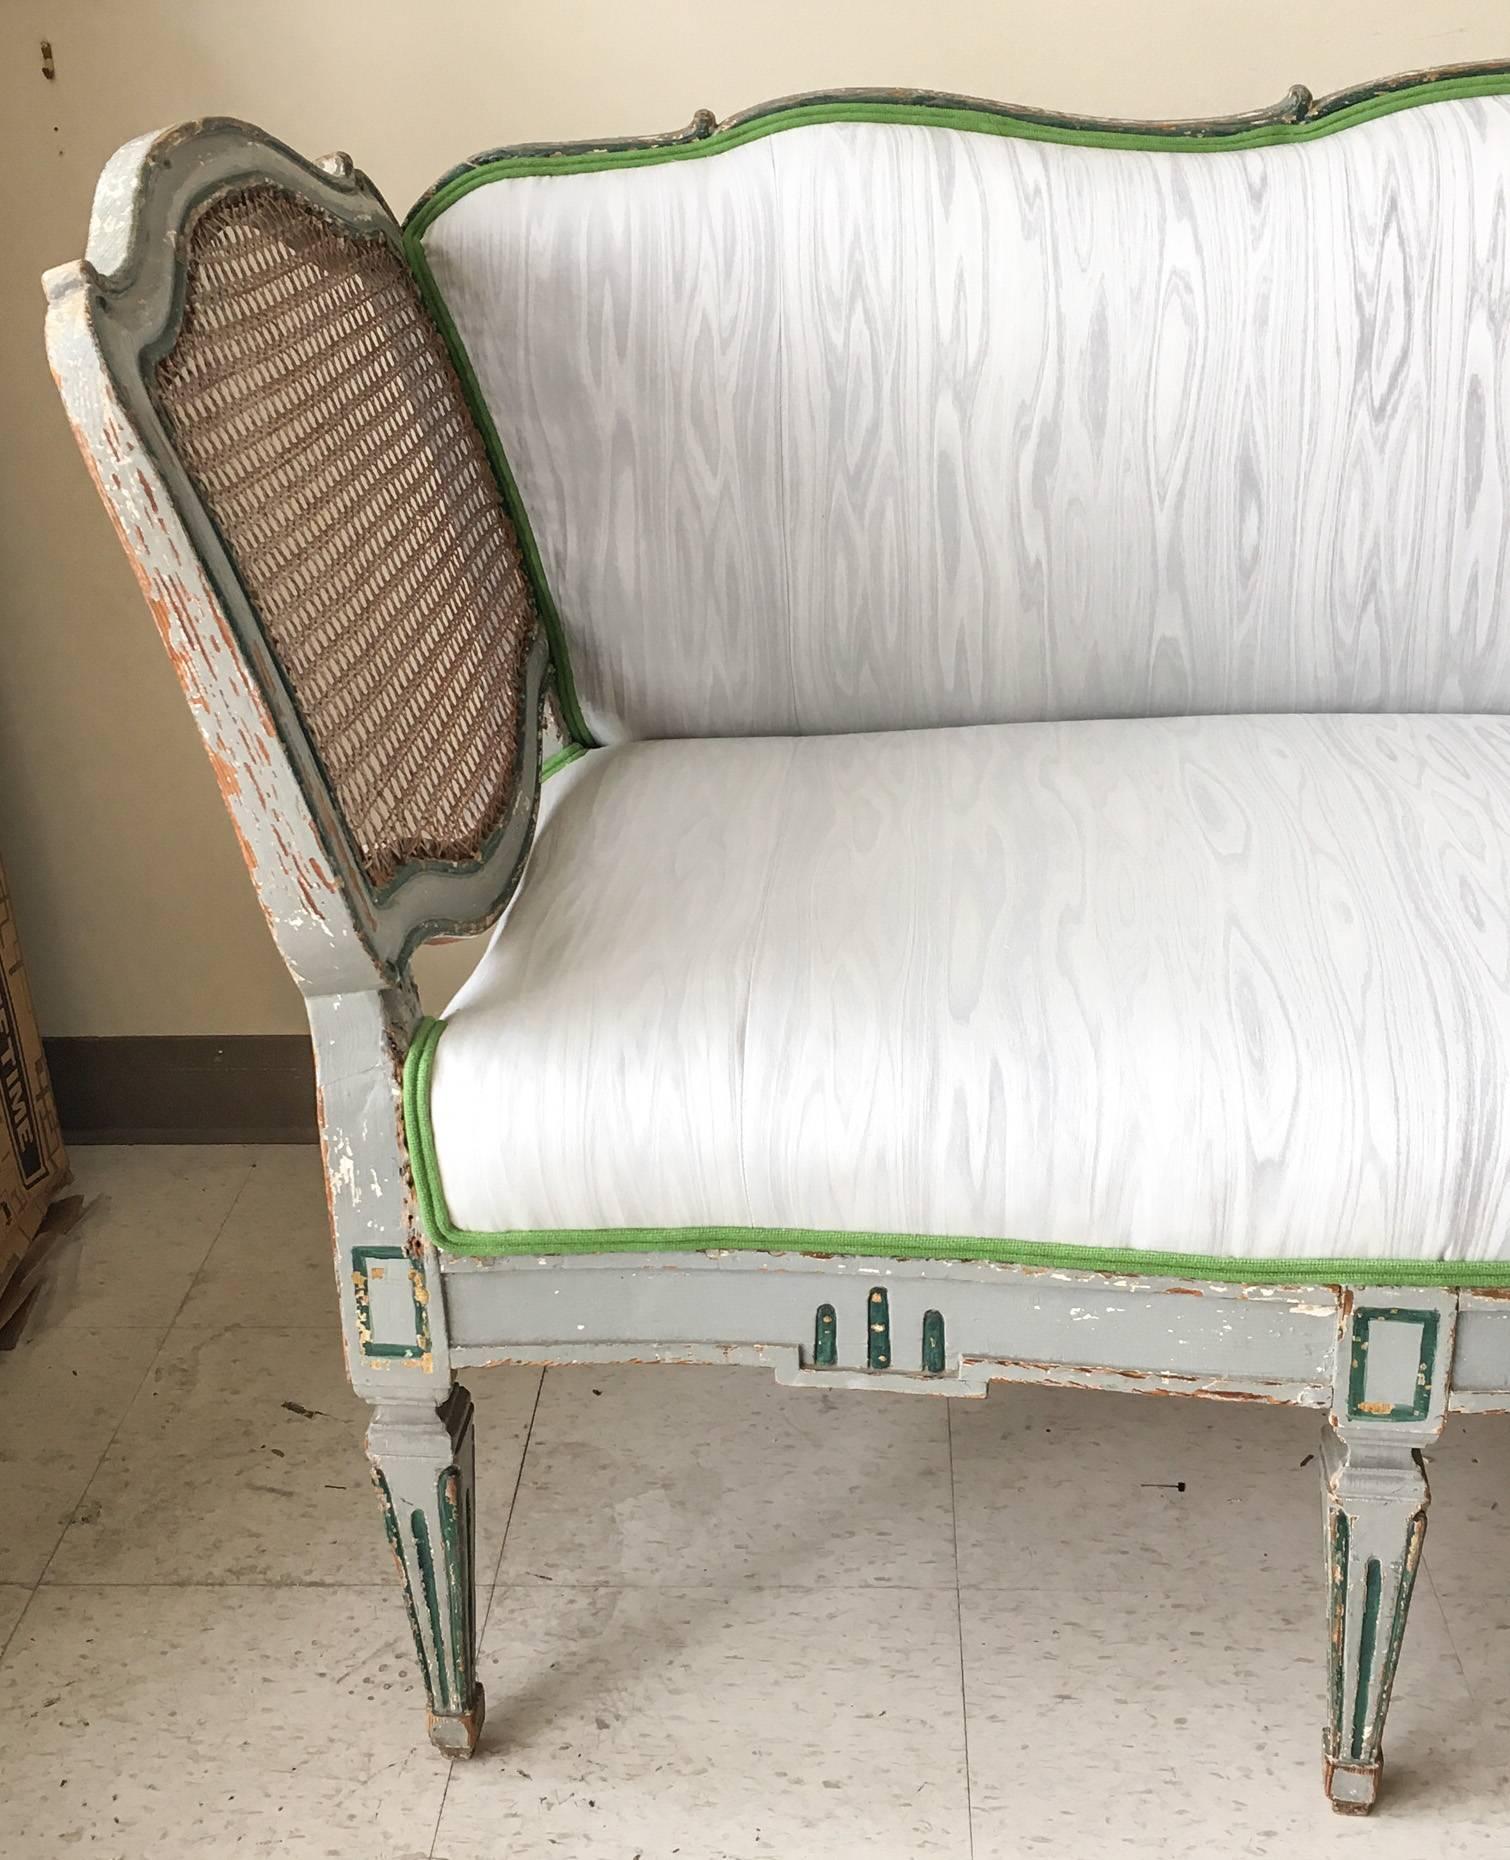 Offered is an elegant sculptural distressed wood and caned arm sofa dating to the mid-19th century, resting on eight spade-shaped legs and painted in soft grey, accented in deep green with traces of white. Purchased from the current owner of